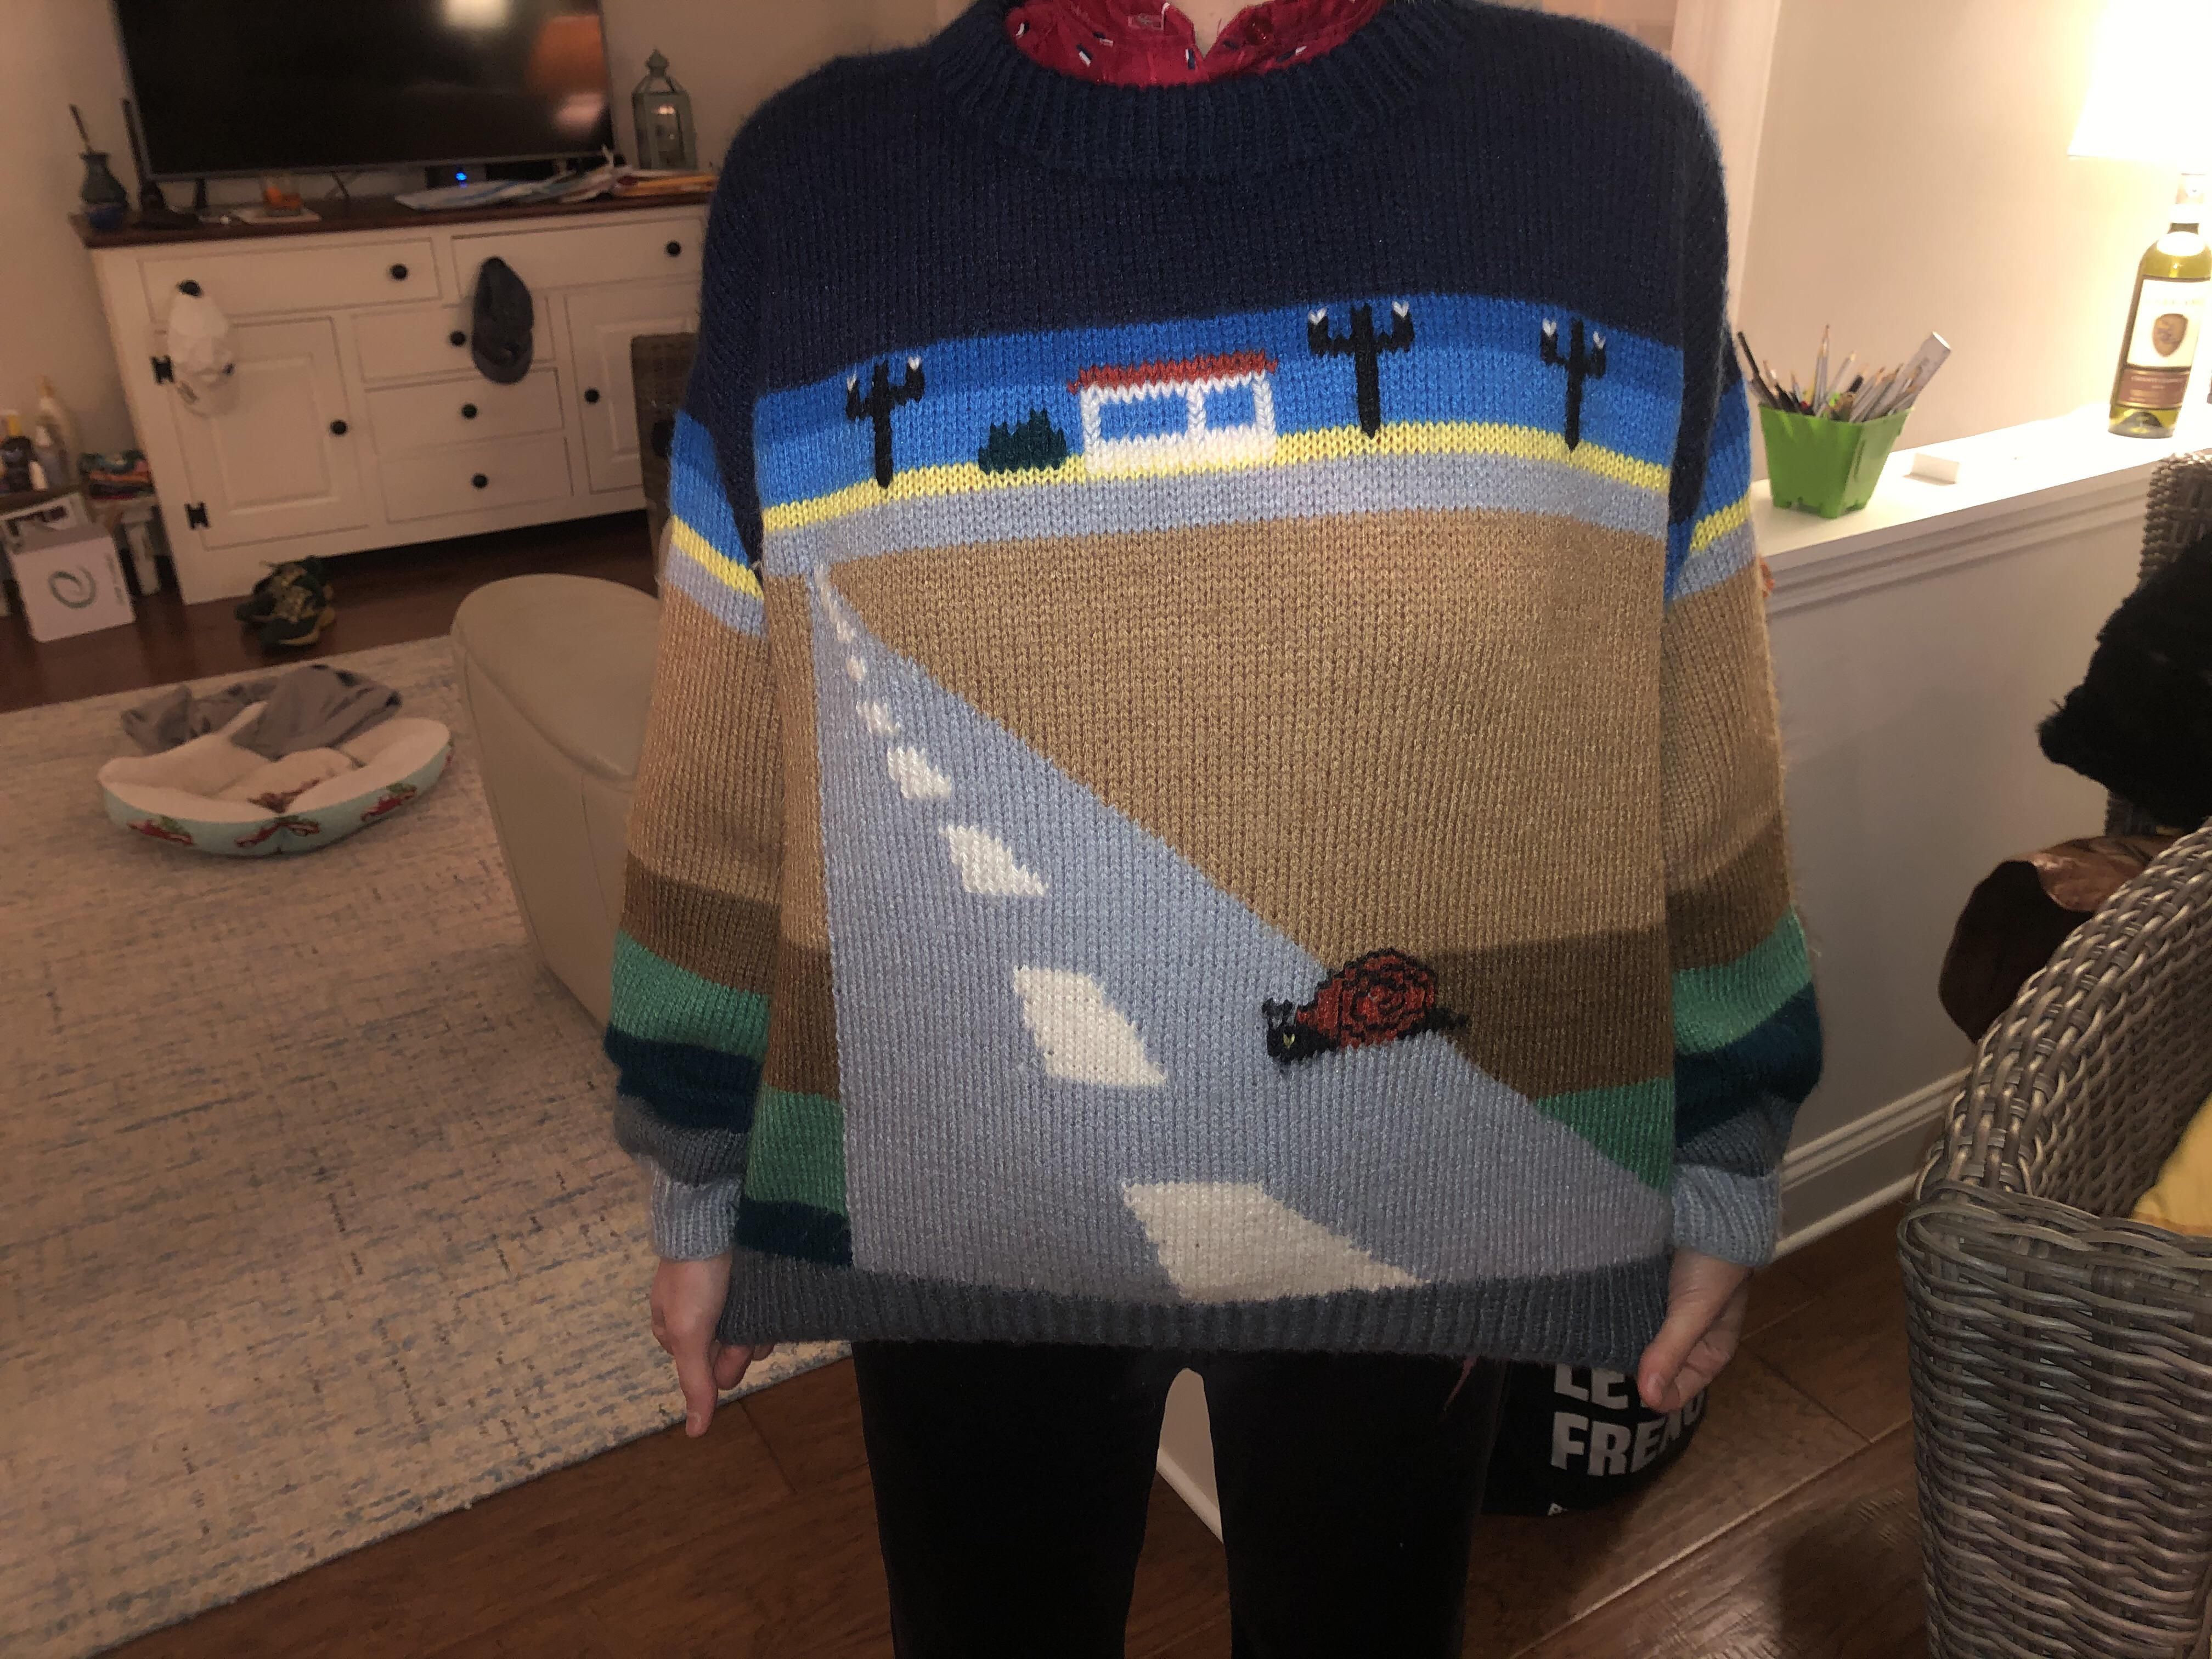 My wife’s mother unintentionally knitted a sweater that’s reminiscent of Pole Position and other 80s arcade games.